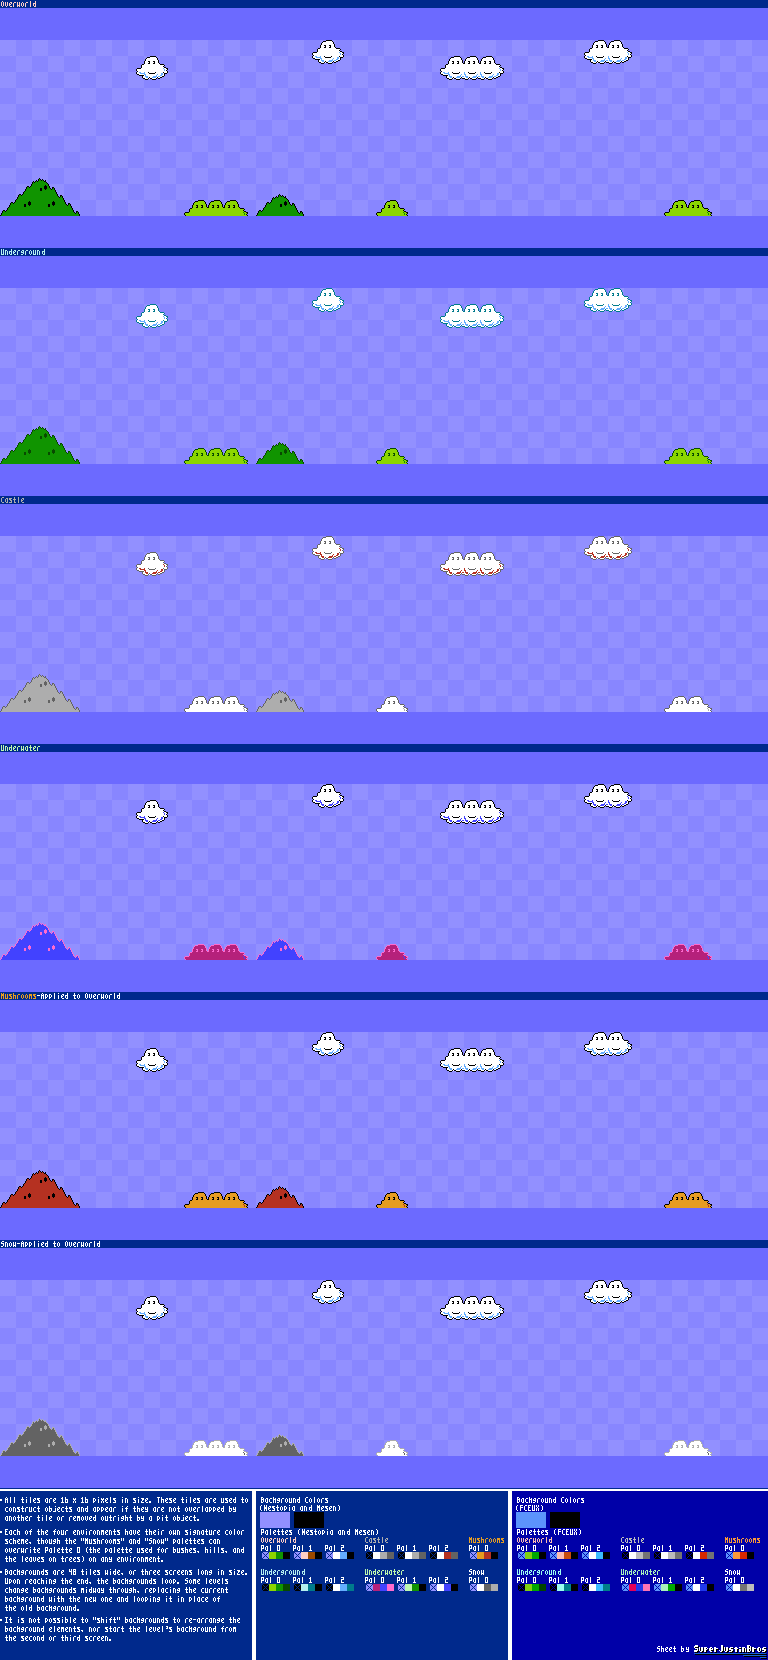 Super Mario Bros. 2 / The Lost Levels (JPN) - Background 1 (Mountains)